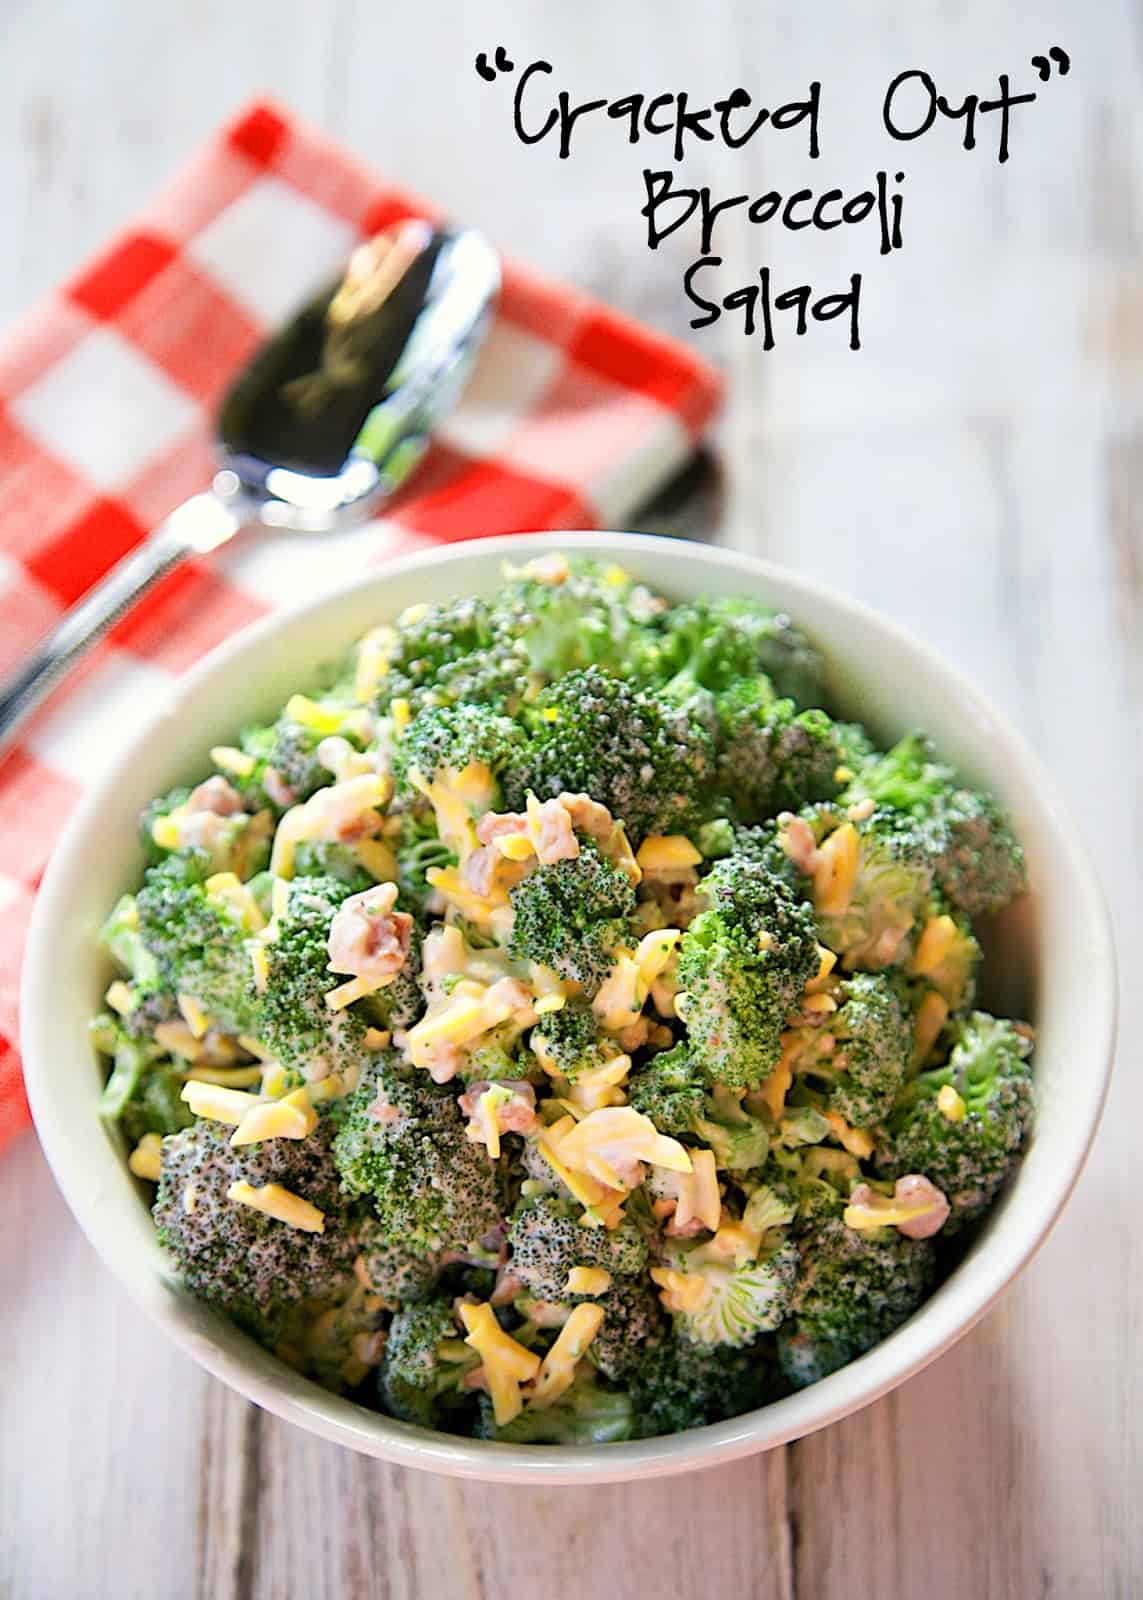 "Cracked Out" Broccoli Salad - fresh broccoli florets tossed with Cheddar, Bacon and Ranch - even broccoli haters love this quick side dish! Great for summer potlucks. Can make ahead and refrigerate until ready to serve.